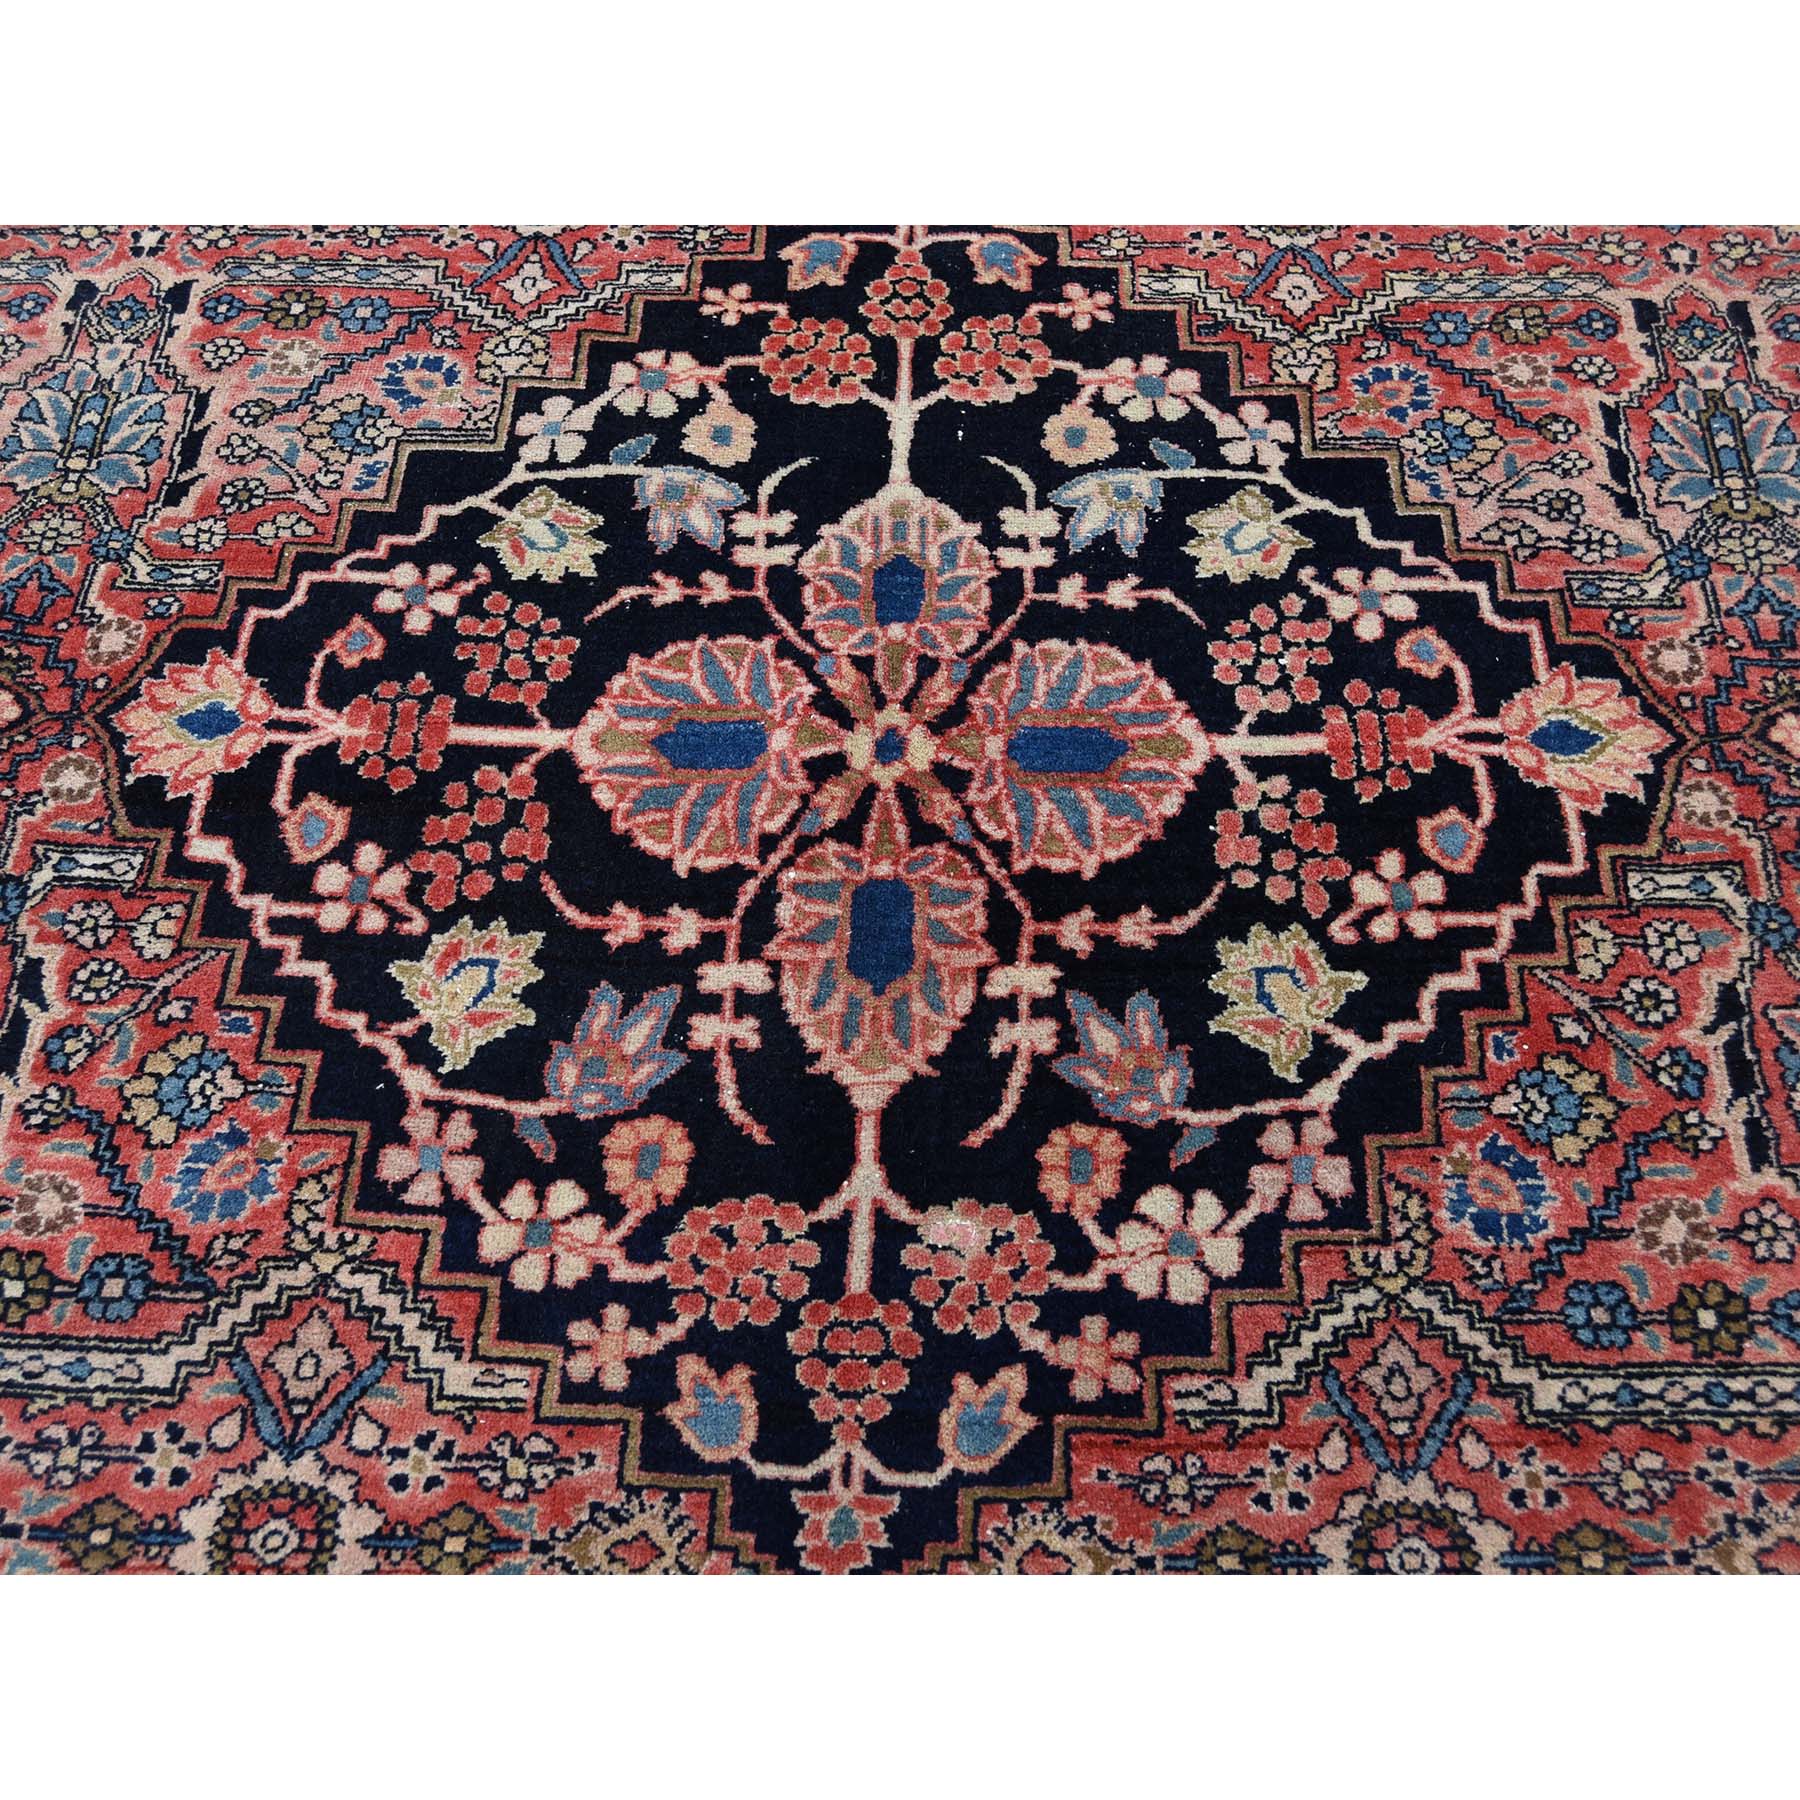 9-10 x13- Antique Persian Bijar Good Cond. Soft Full Pile Pure Wool Hand-Knotted Oriental Rug 